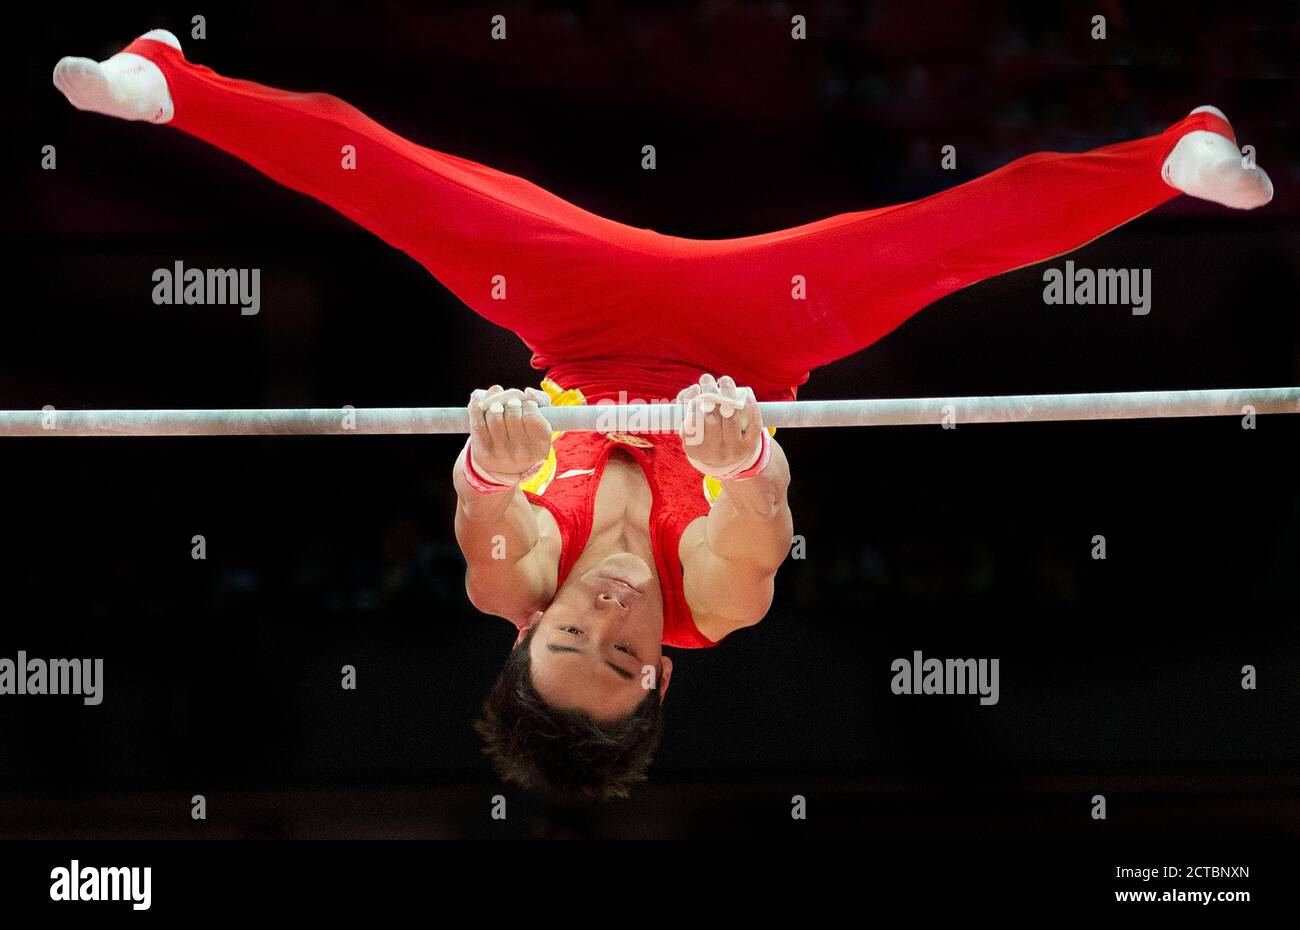 MENS HORIZONTAL BAR FINAL LONDRES 2012 OLYMPICS NORTH GREENWICH ARENA Copyright image : Mark pain / Alamy Banque D'Images